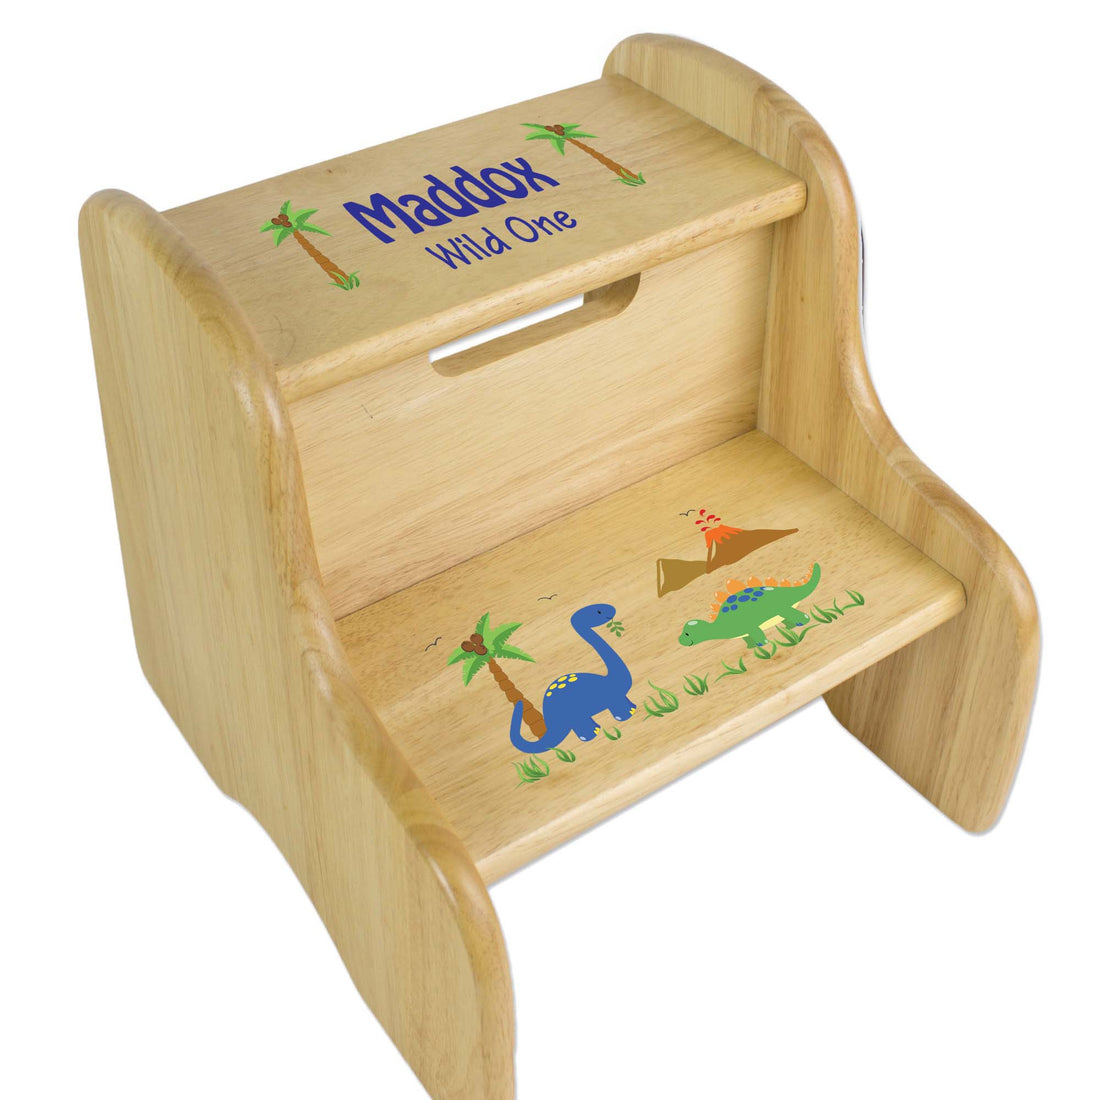 Personalized Wooden Step Stool With Dinosaurs Design